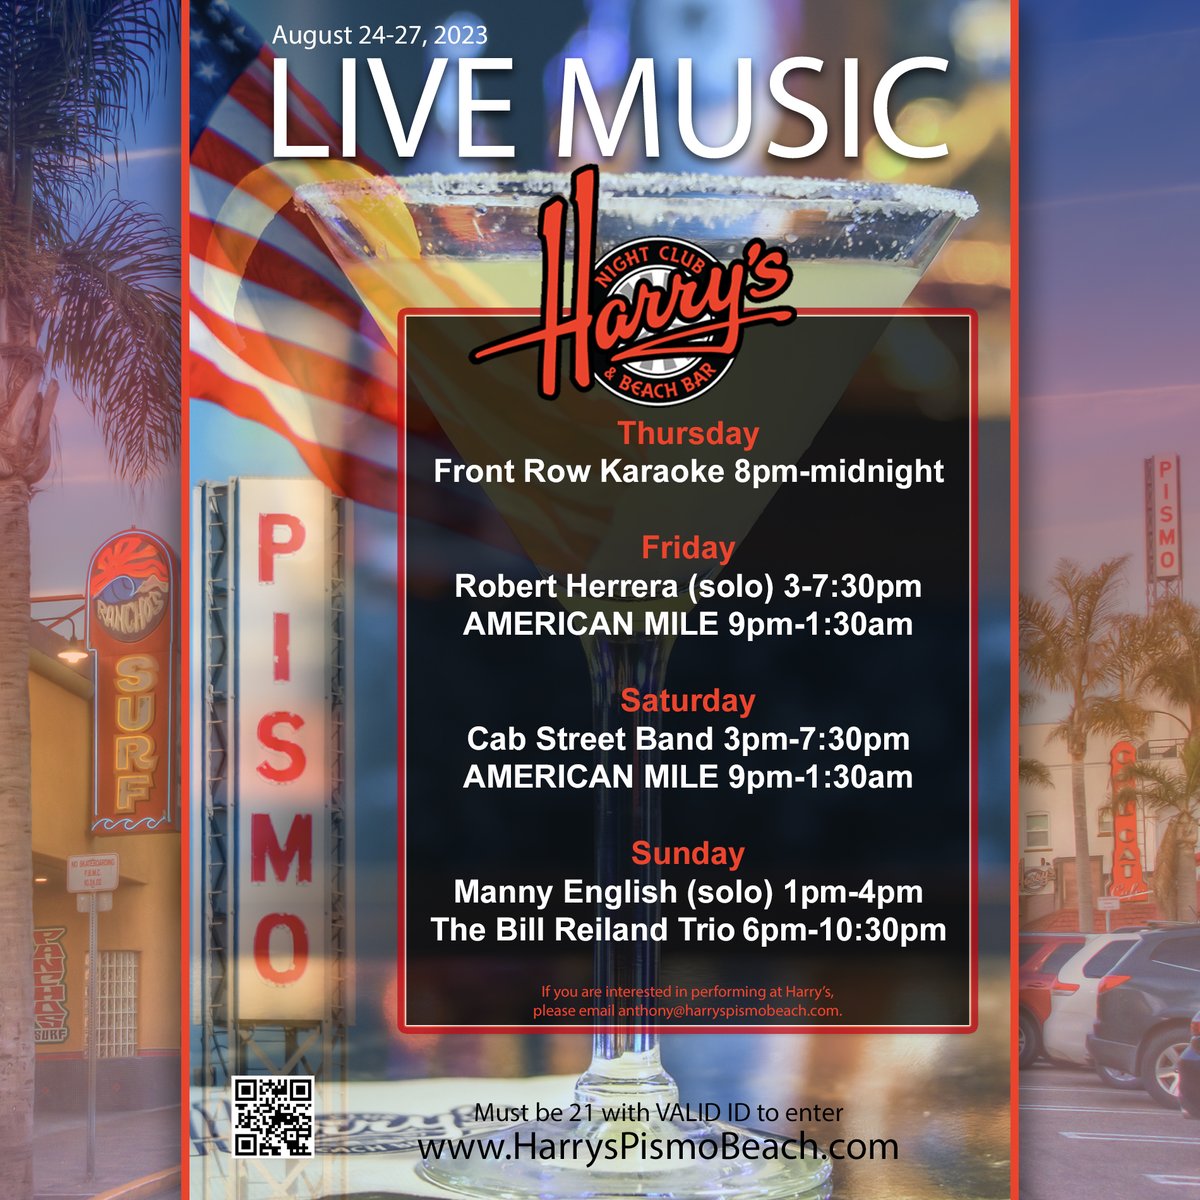 Harry's Entertainment Lineup for August 24-27, 2023 harryspismobeach.com/2023/08/harrys… #pismobeach #harryspismobeach #livemusic #centralcoast